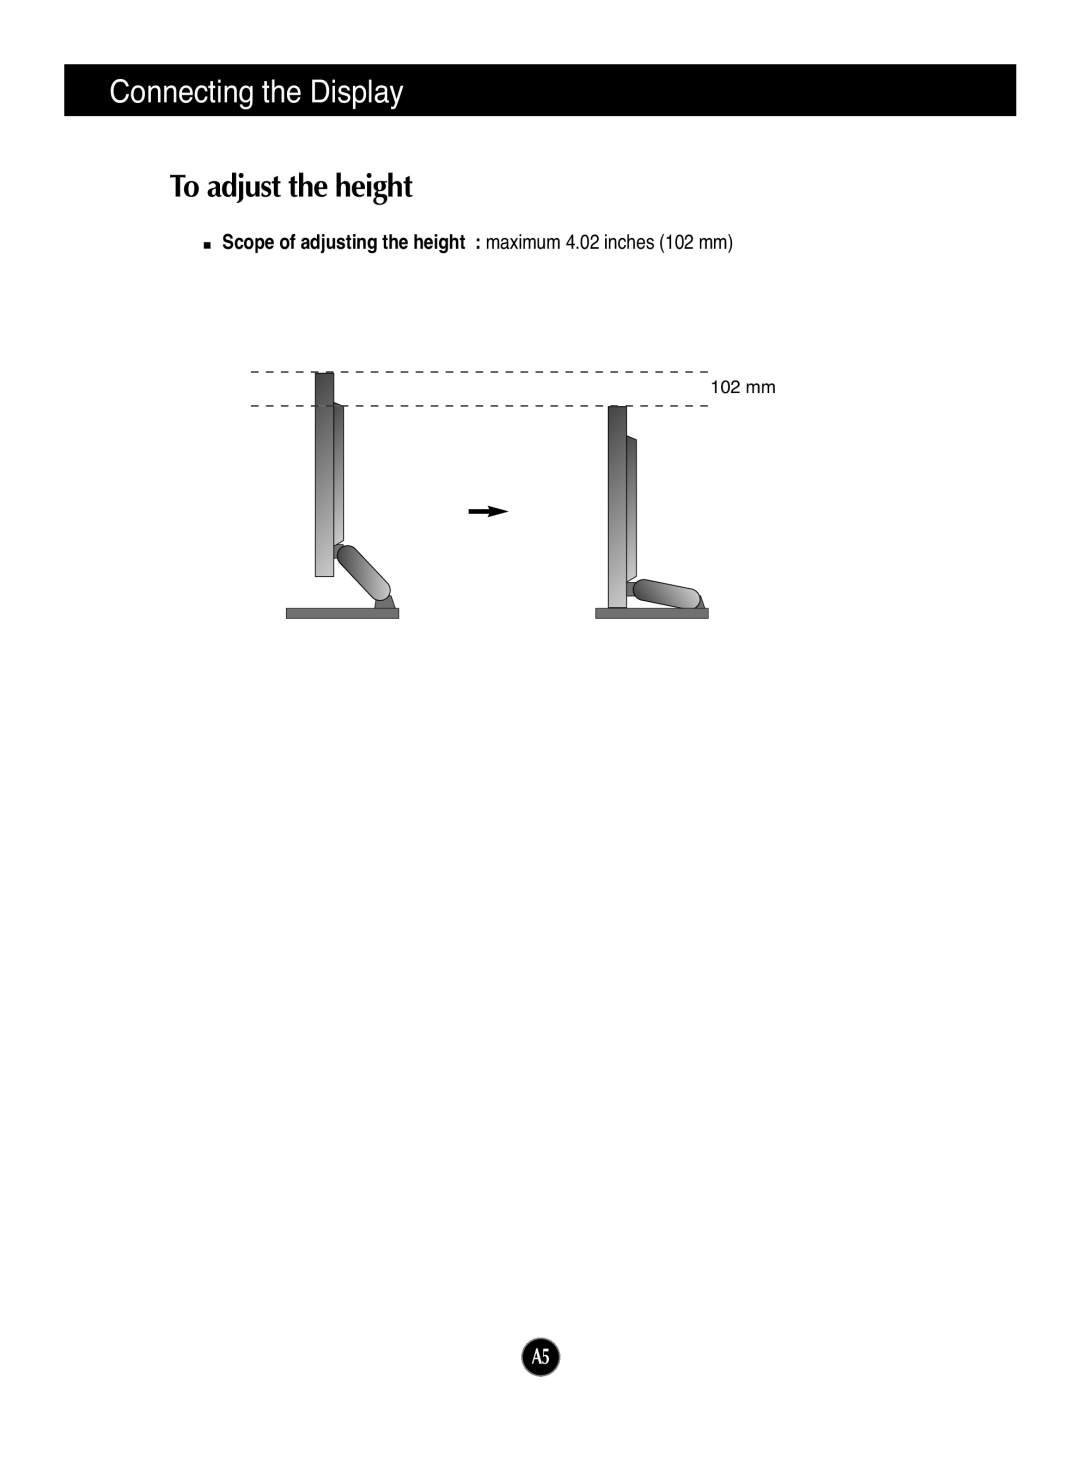 LG Electronics L1972H manual To adjust the height, Connecting the Display 